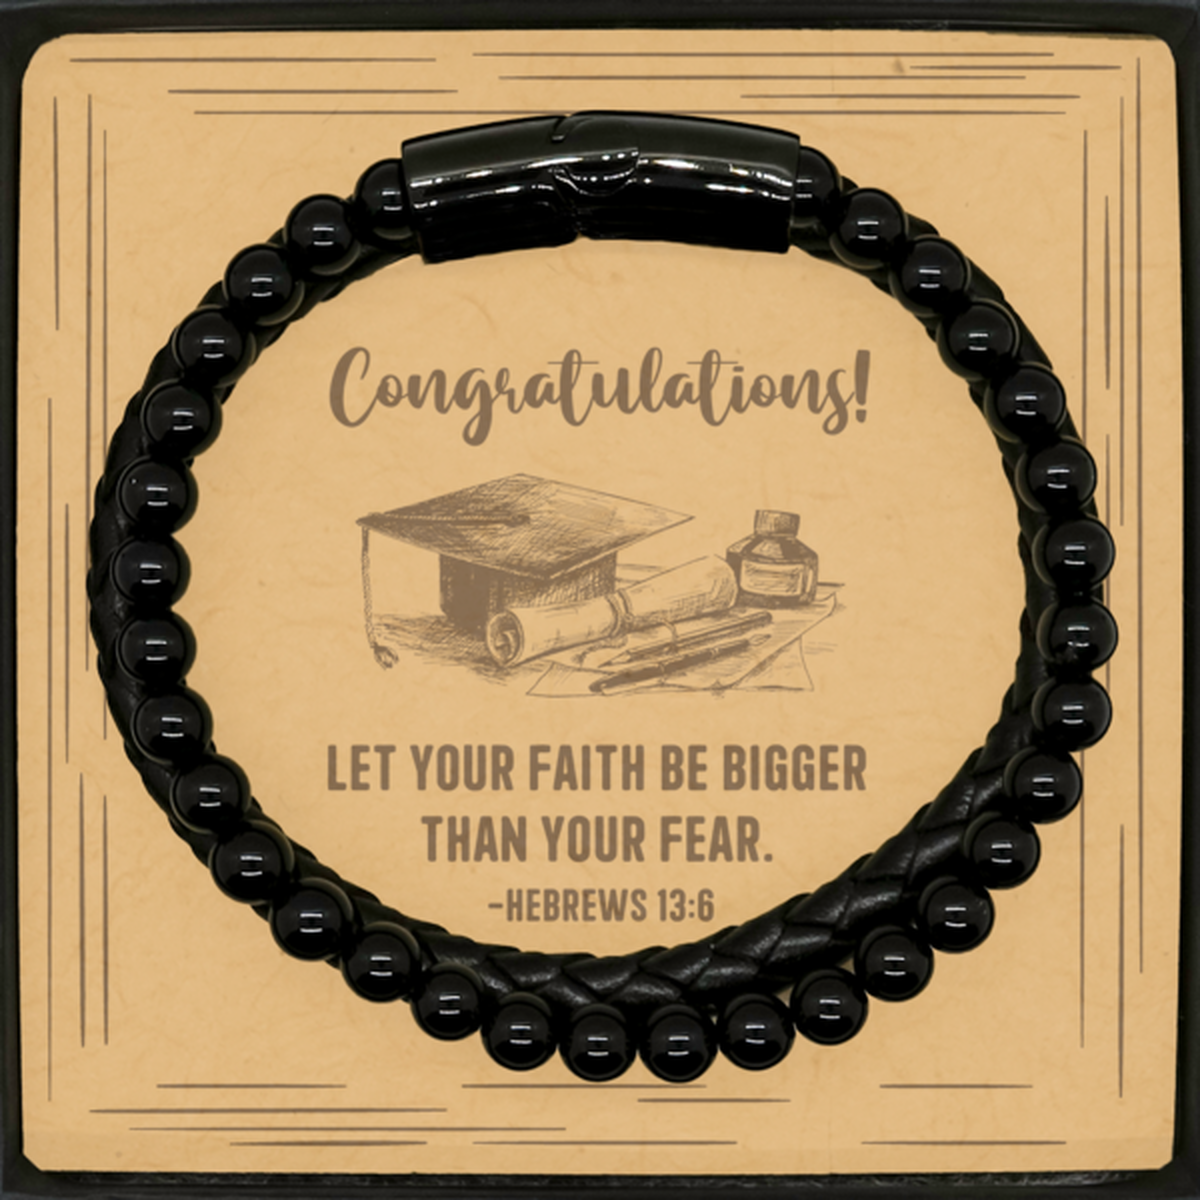 Religious Graduation Cards, Let your faith be bigger than your fear, Bible Verse Stone Leather Bracelet, Christian Graduation Gifts